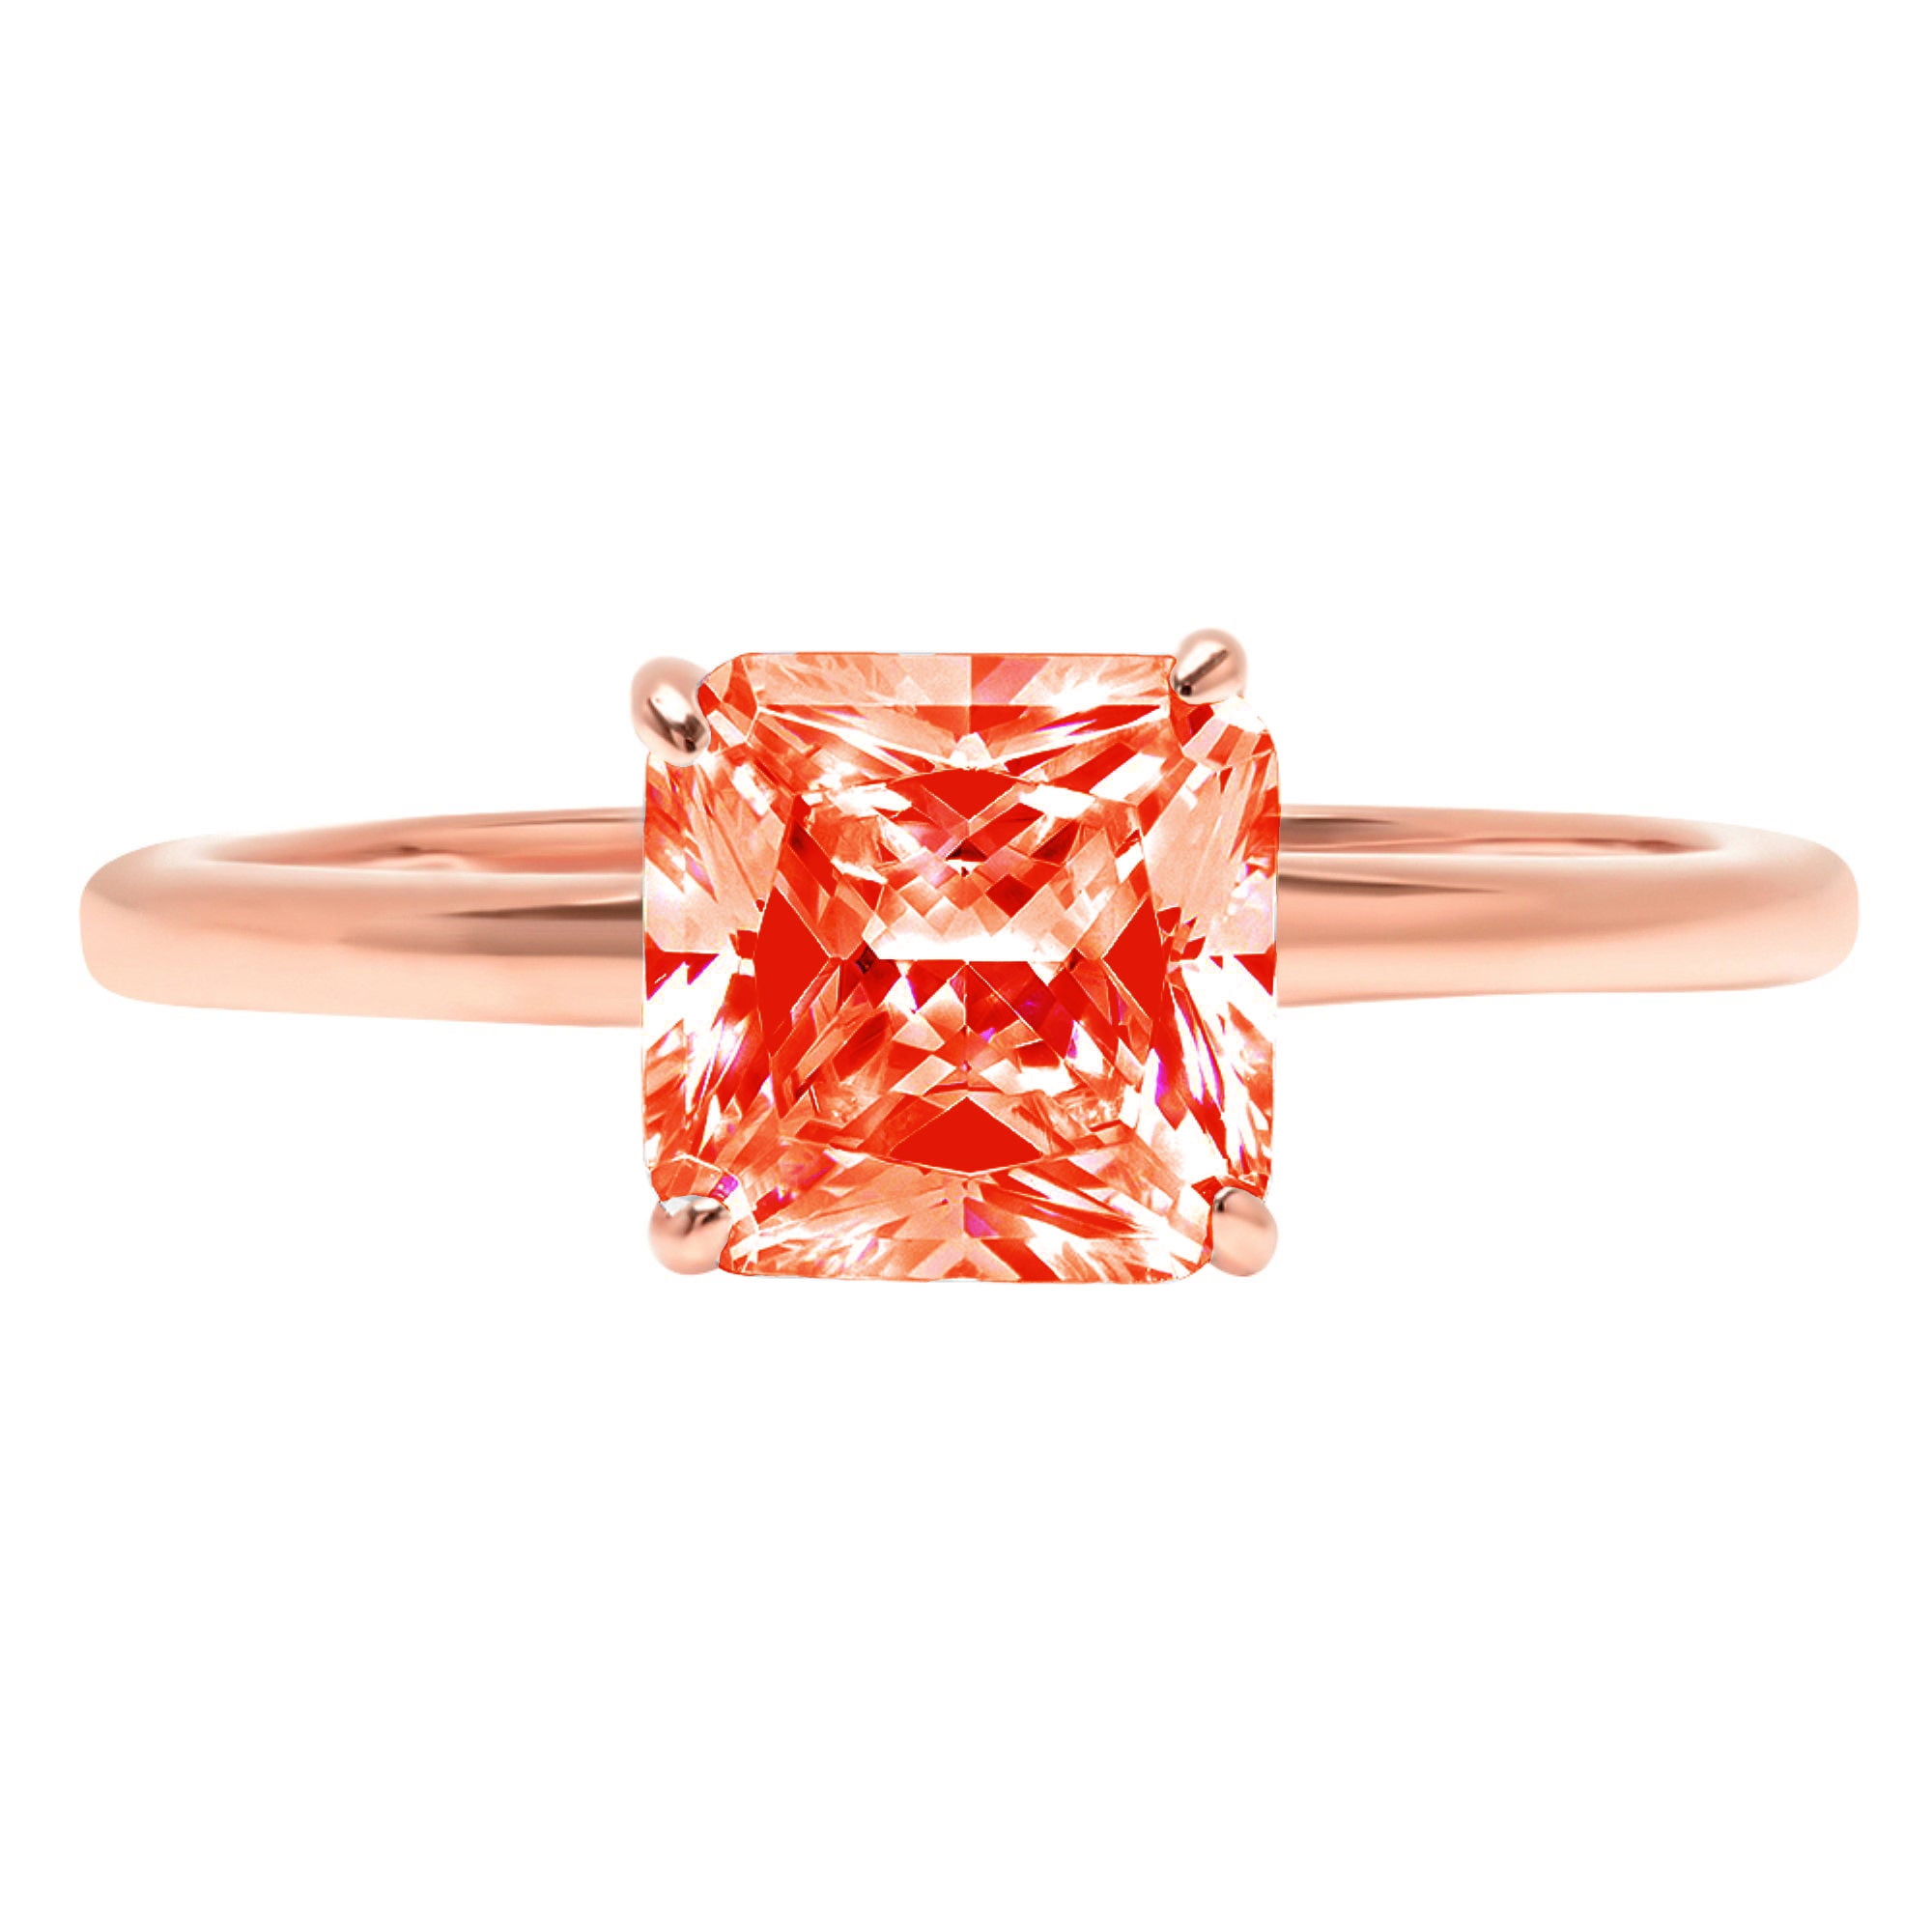 2.5 ct Brilliant Round Cut VVS1 Red Simulated Diamond Rose Solid 14k or 18k Gold Robotic Laser Engraved Handmade Anniversary Solitaire Ring